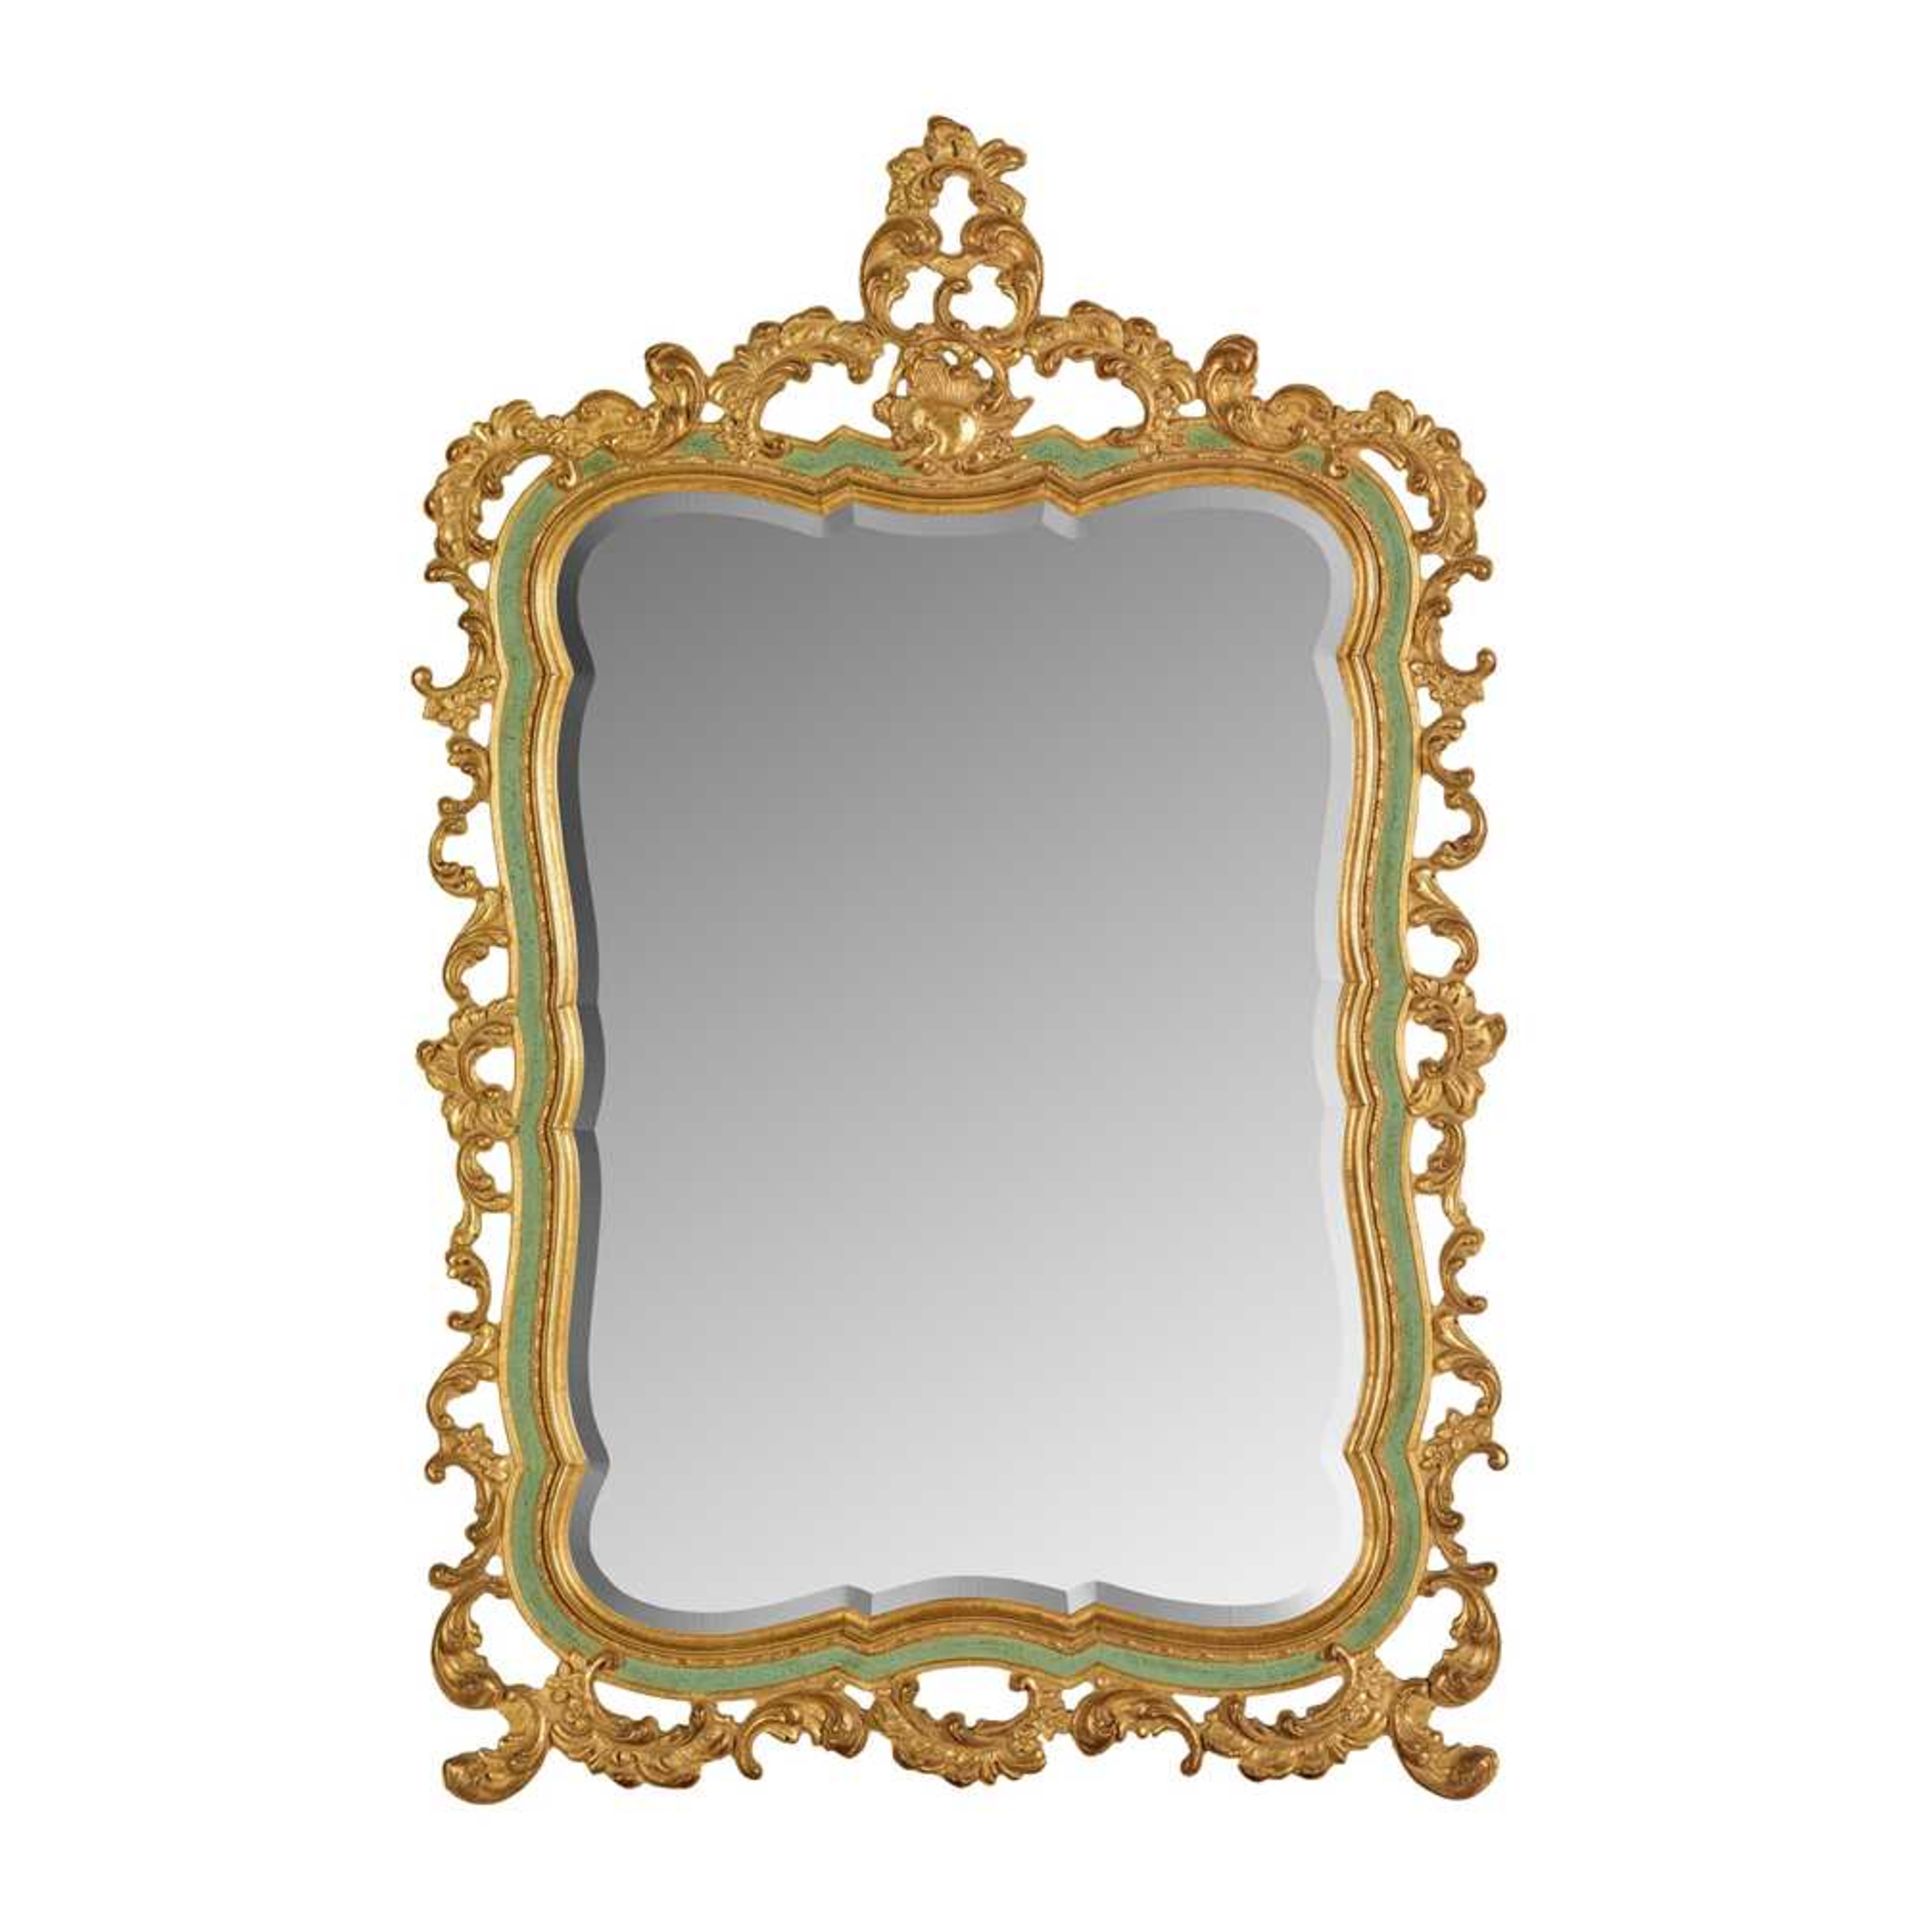 GEORGIAN STYLE PAINTED AND GILTWOOD MIRROR MODERN